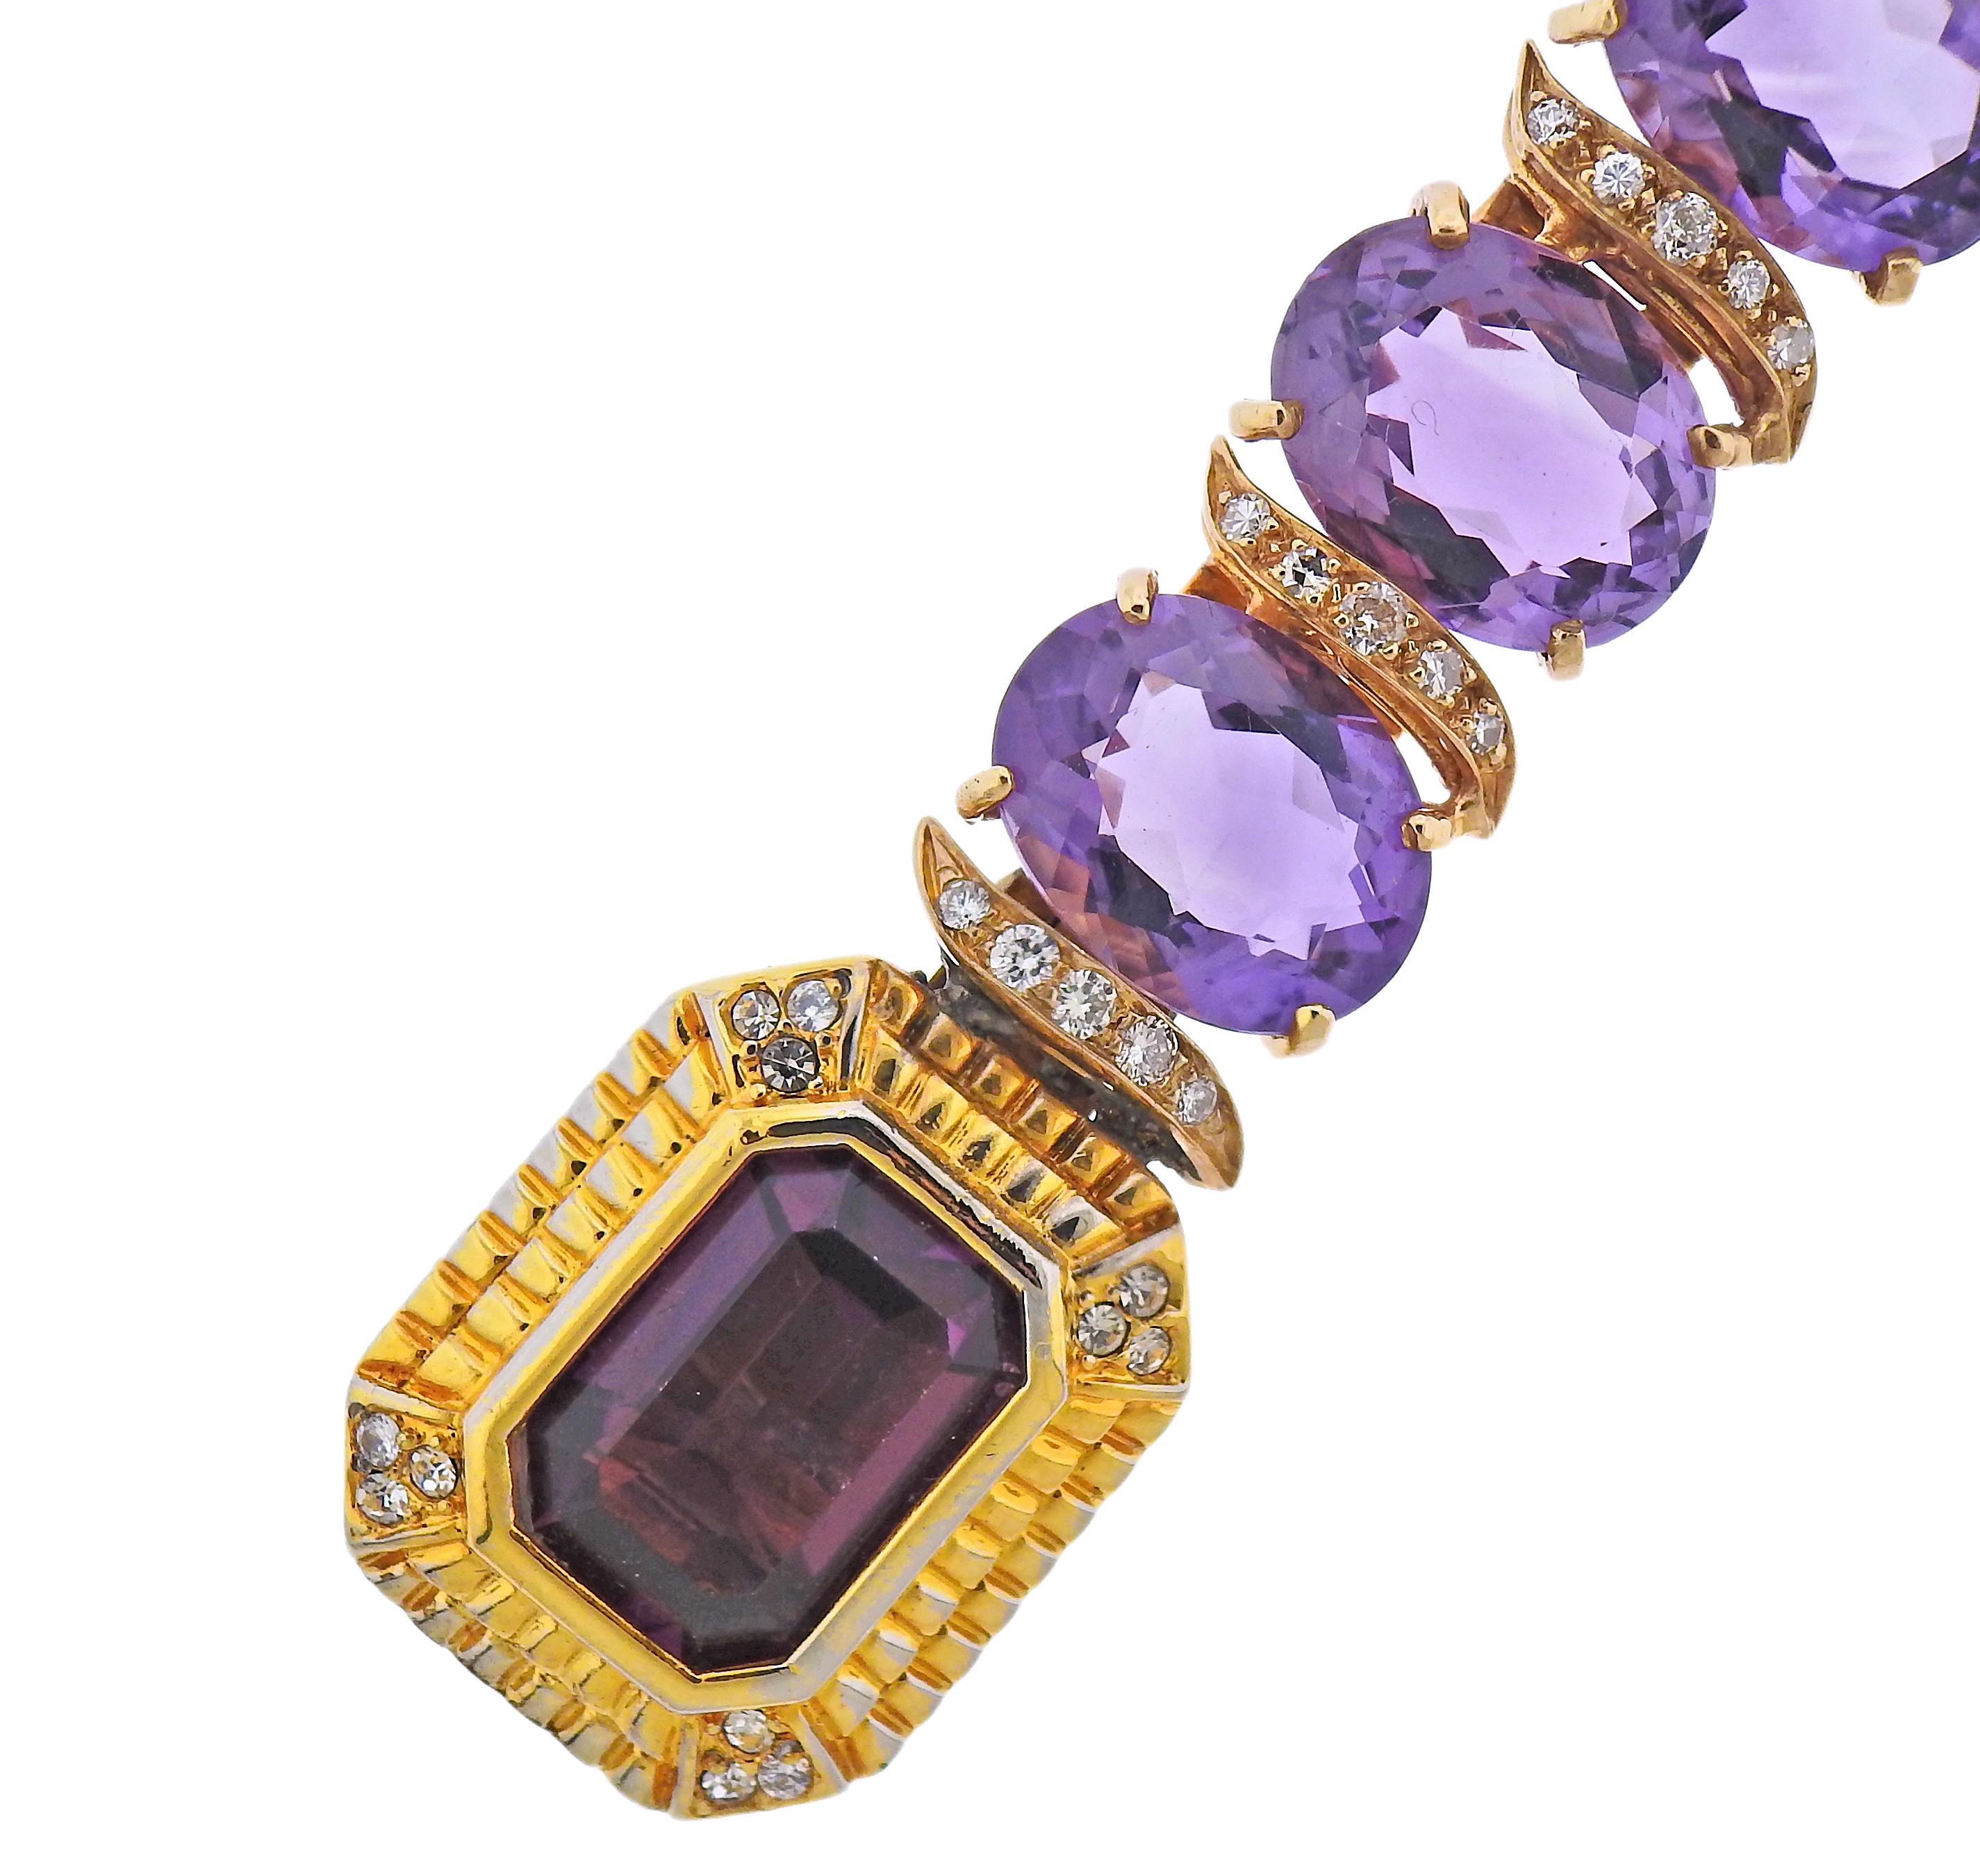 14k gold bracelet with amethyst gemstones (approx. 16mm x 12mm) and approx. 1.90cts in diamonds. The center (clasp) portion is not original, was soldered to the bracelet. Bracelet is 7.5